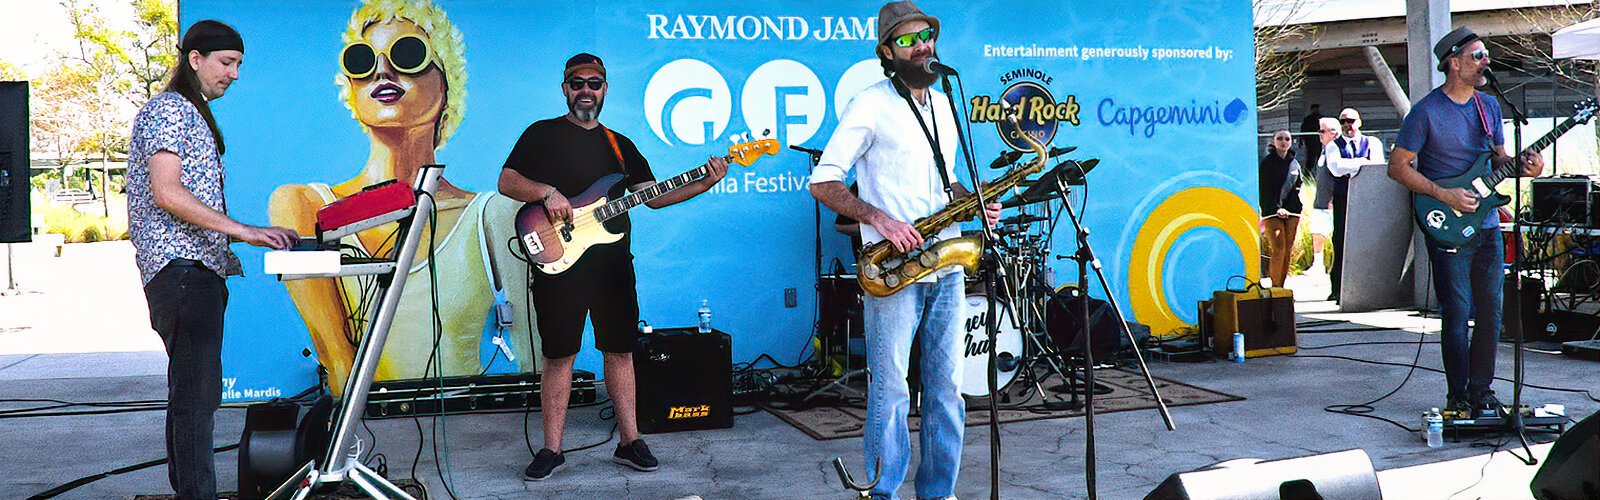 The Dunedin-based band Shoeless Soul performs its mix of jazz, rock and reggae on stage at the Gasparilla Festival of the Arts. A full lineup of performers entertained the crowd during the two-day event.